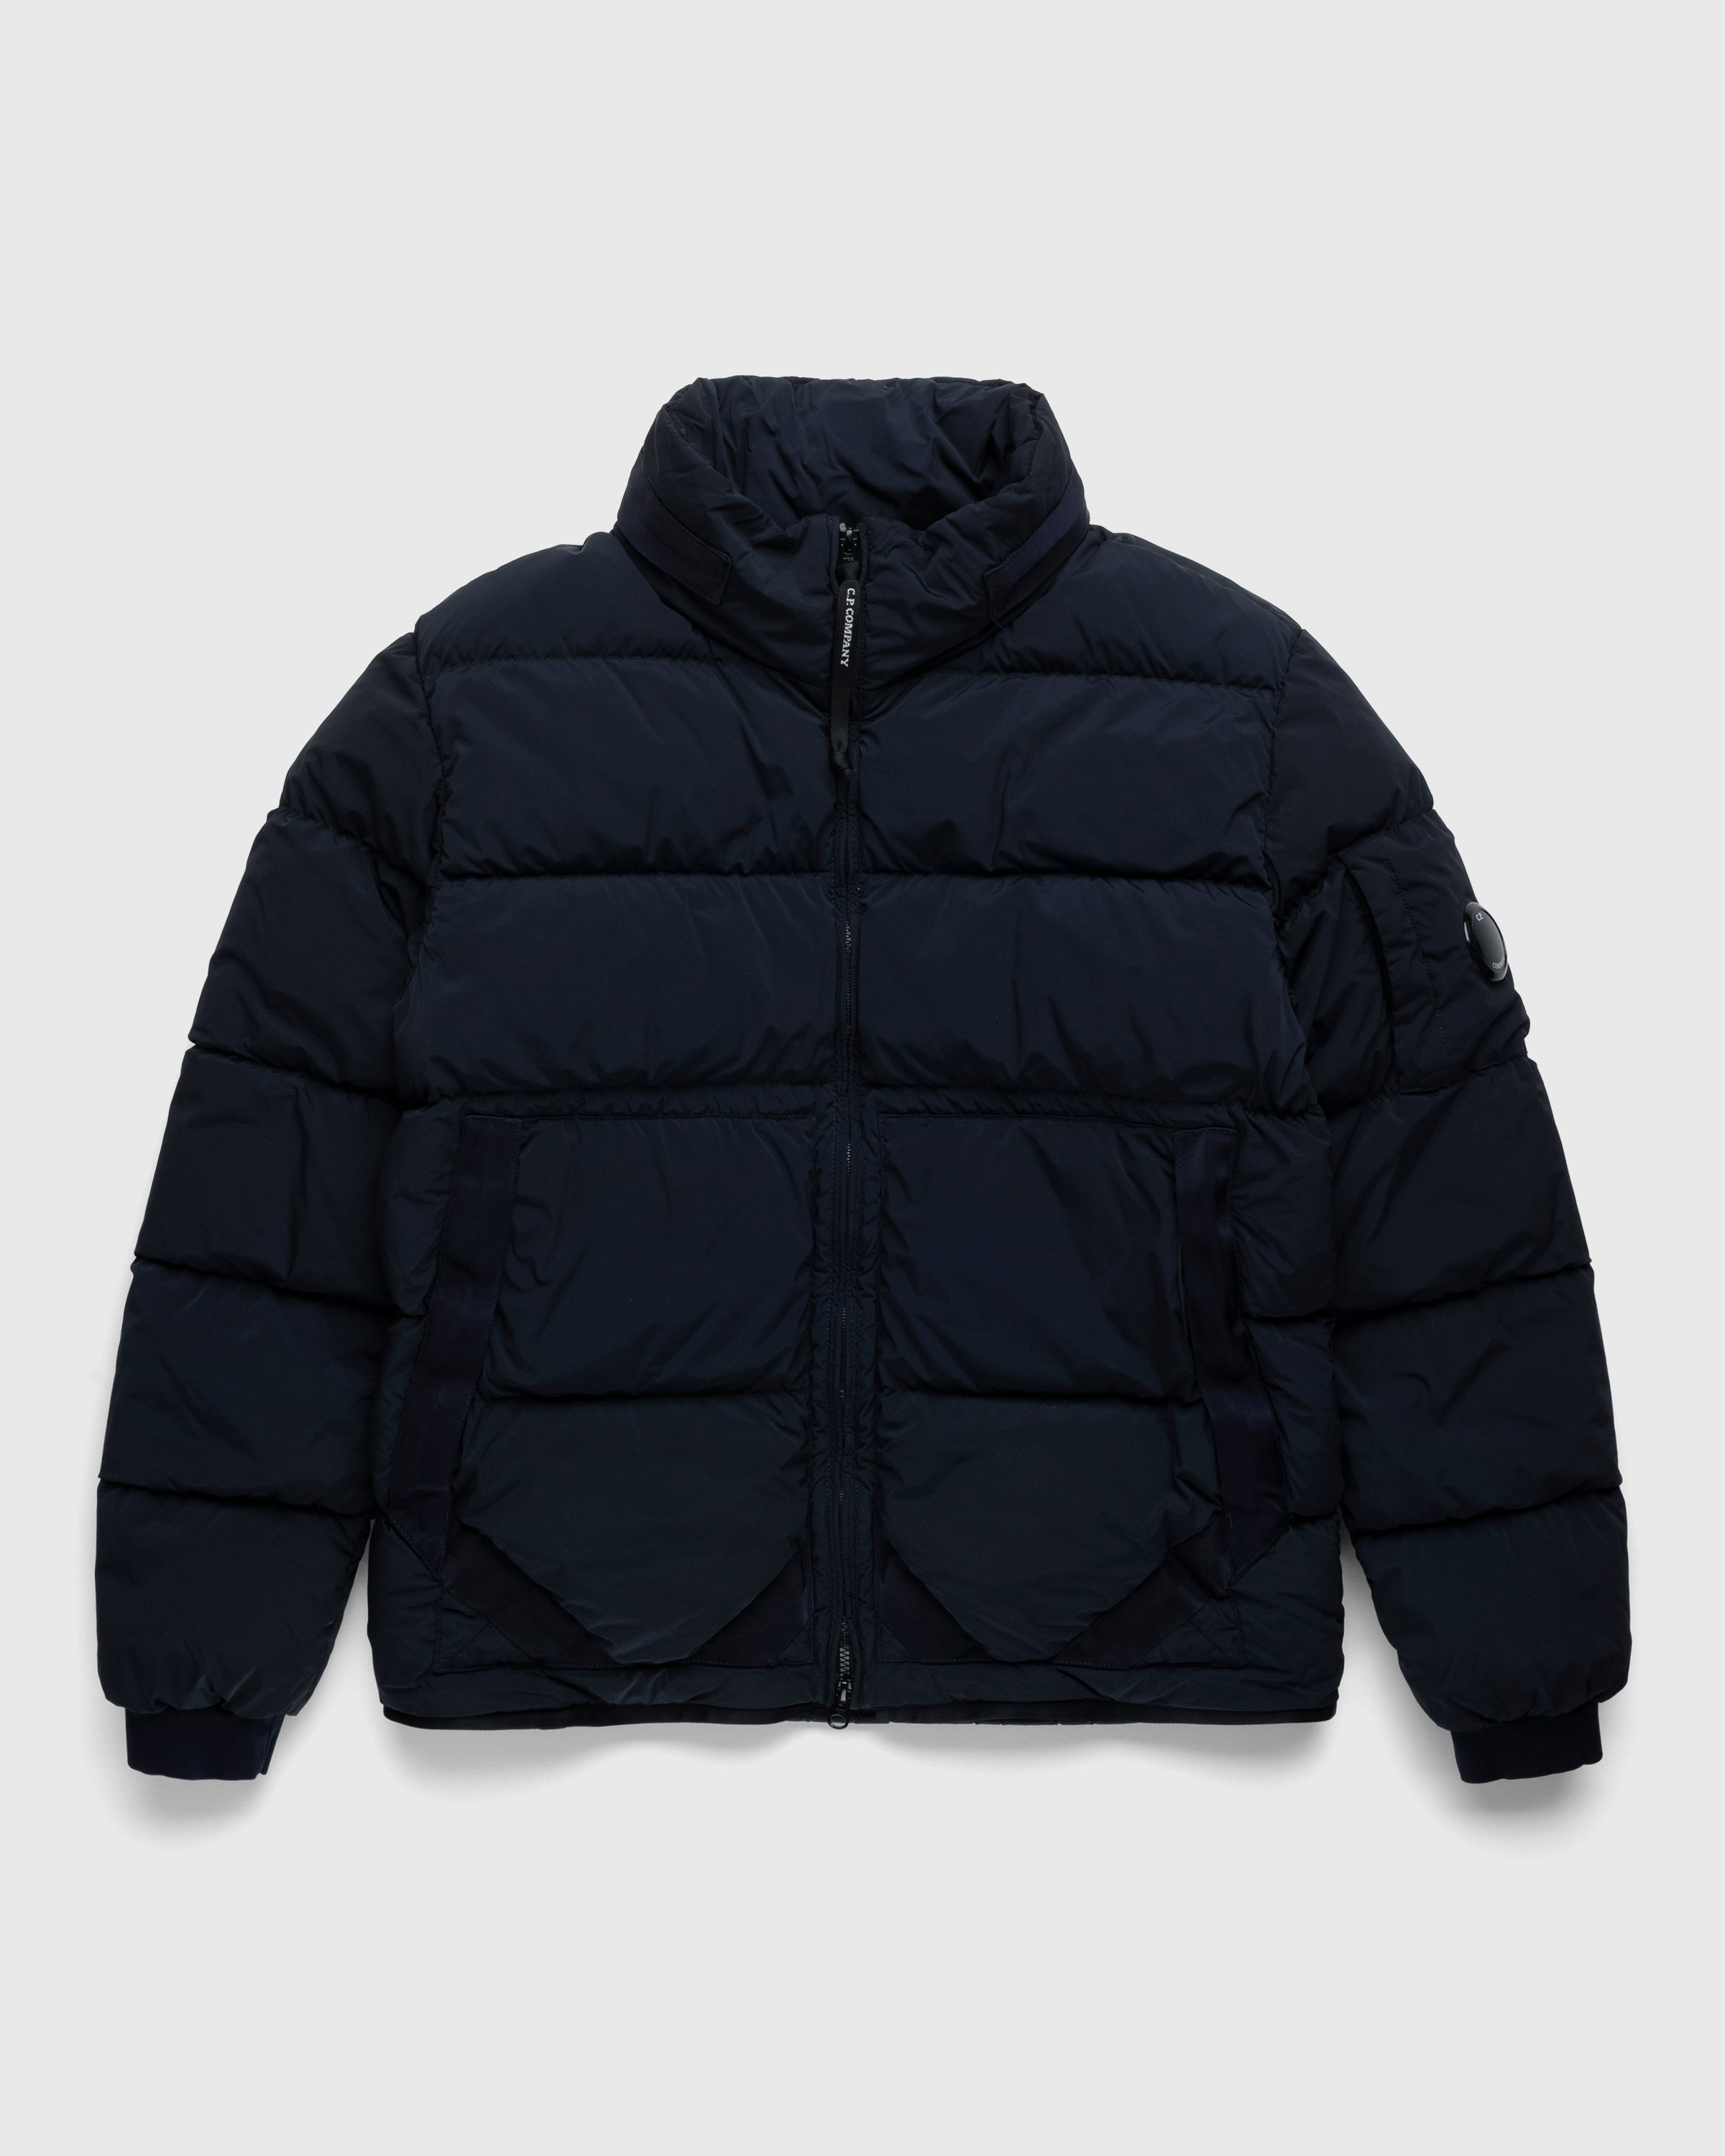 C.P. Company - Nycra-R Down Jacket Black - Outerwear - Black - Image 1